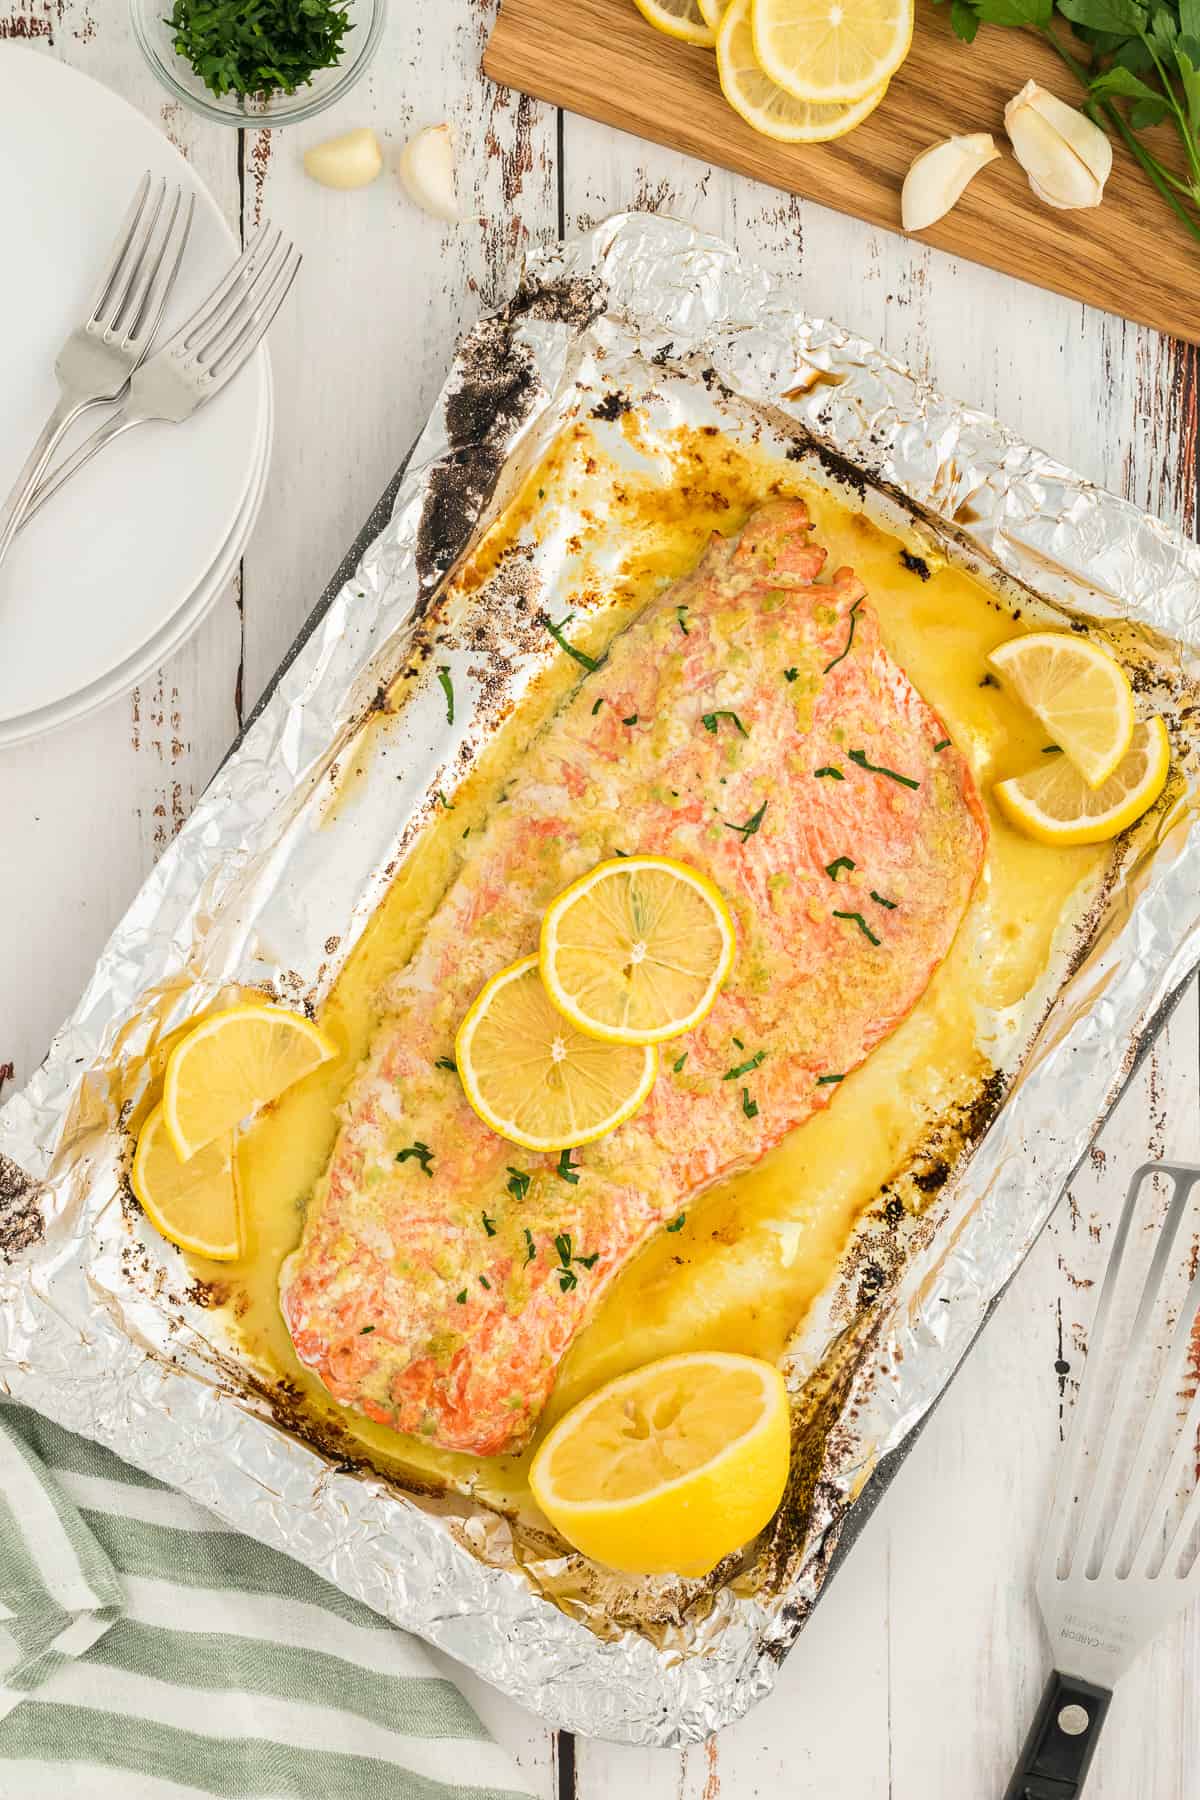 A large salmon fillet with garlic butter sauce a lemon slices on a foil lined baking sheet next to a striped cloth and a cutting board.